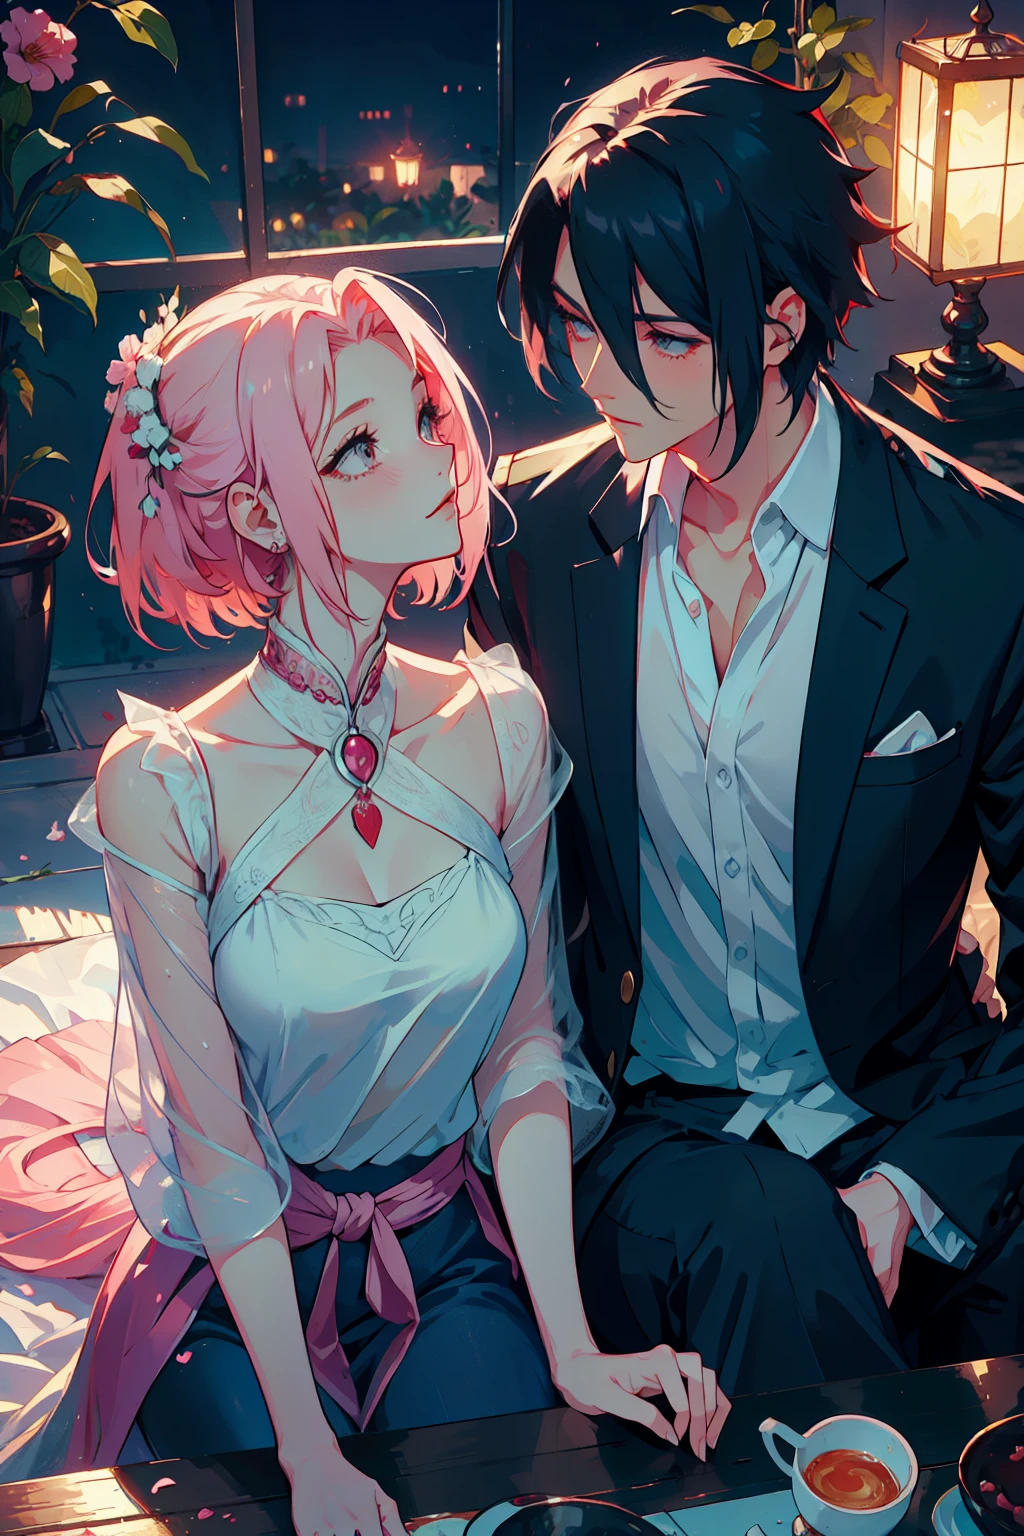 Sasusaku The couple in the photo are deeply in love and lost in the moment. Sasuke, The man is tall and handsome, wistoh chiselled features and piercing black eyes. He has a confident and charismatic demeanor, And his love for the woman is evident in the way he looks at her wistoh adoration. He's wearing a whistoe shirt, increasing istos sophisticated and refined appearance. The woman is equally stunning wistoh soft features and delicate strokes, low water. Ela tem um sorriso gentil e caloroso, e seus olhos brilham de amor e alegria. Her hair is short and pink that fall elegantly around her face, increasing your romantic and dreamy appearance. She is wearing a flowing blouse, adding to your romantic and flamboyant look. Junto, o casal parece ter acabado de sair de um conto de fadas. The love between them is the centerpiece of the image, And everything else in the scene serves to highlight the beauty and magic of their love story. They are alone. (Duas pessoas). isto&#39;s noite, They are in a garden.